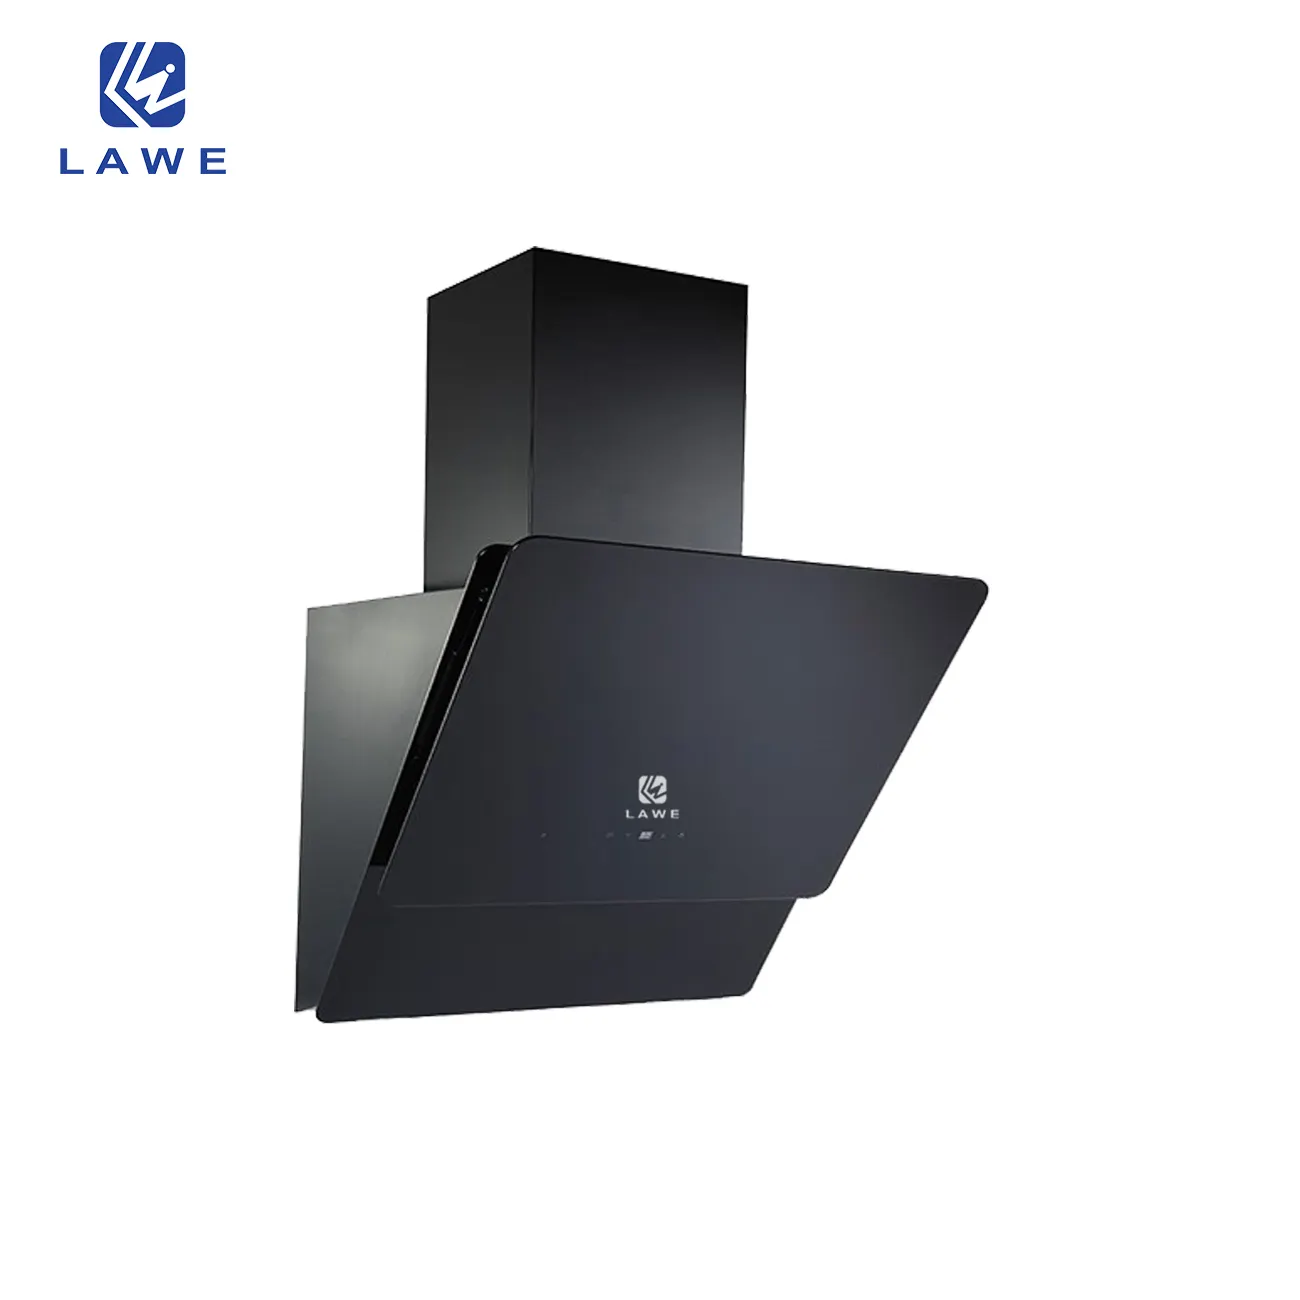 Hot Selling Fashion Multifunction Cooker Equipment Equipment Delicate Appearance Range Hood